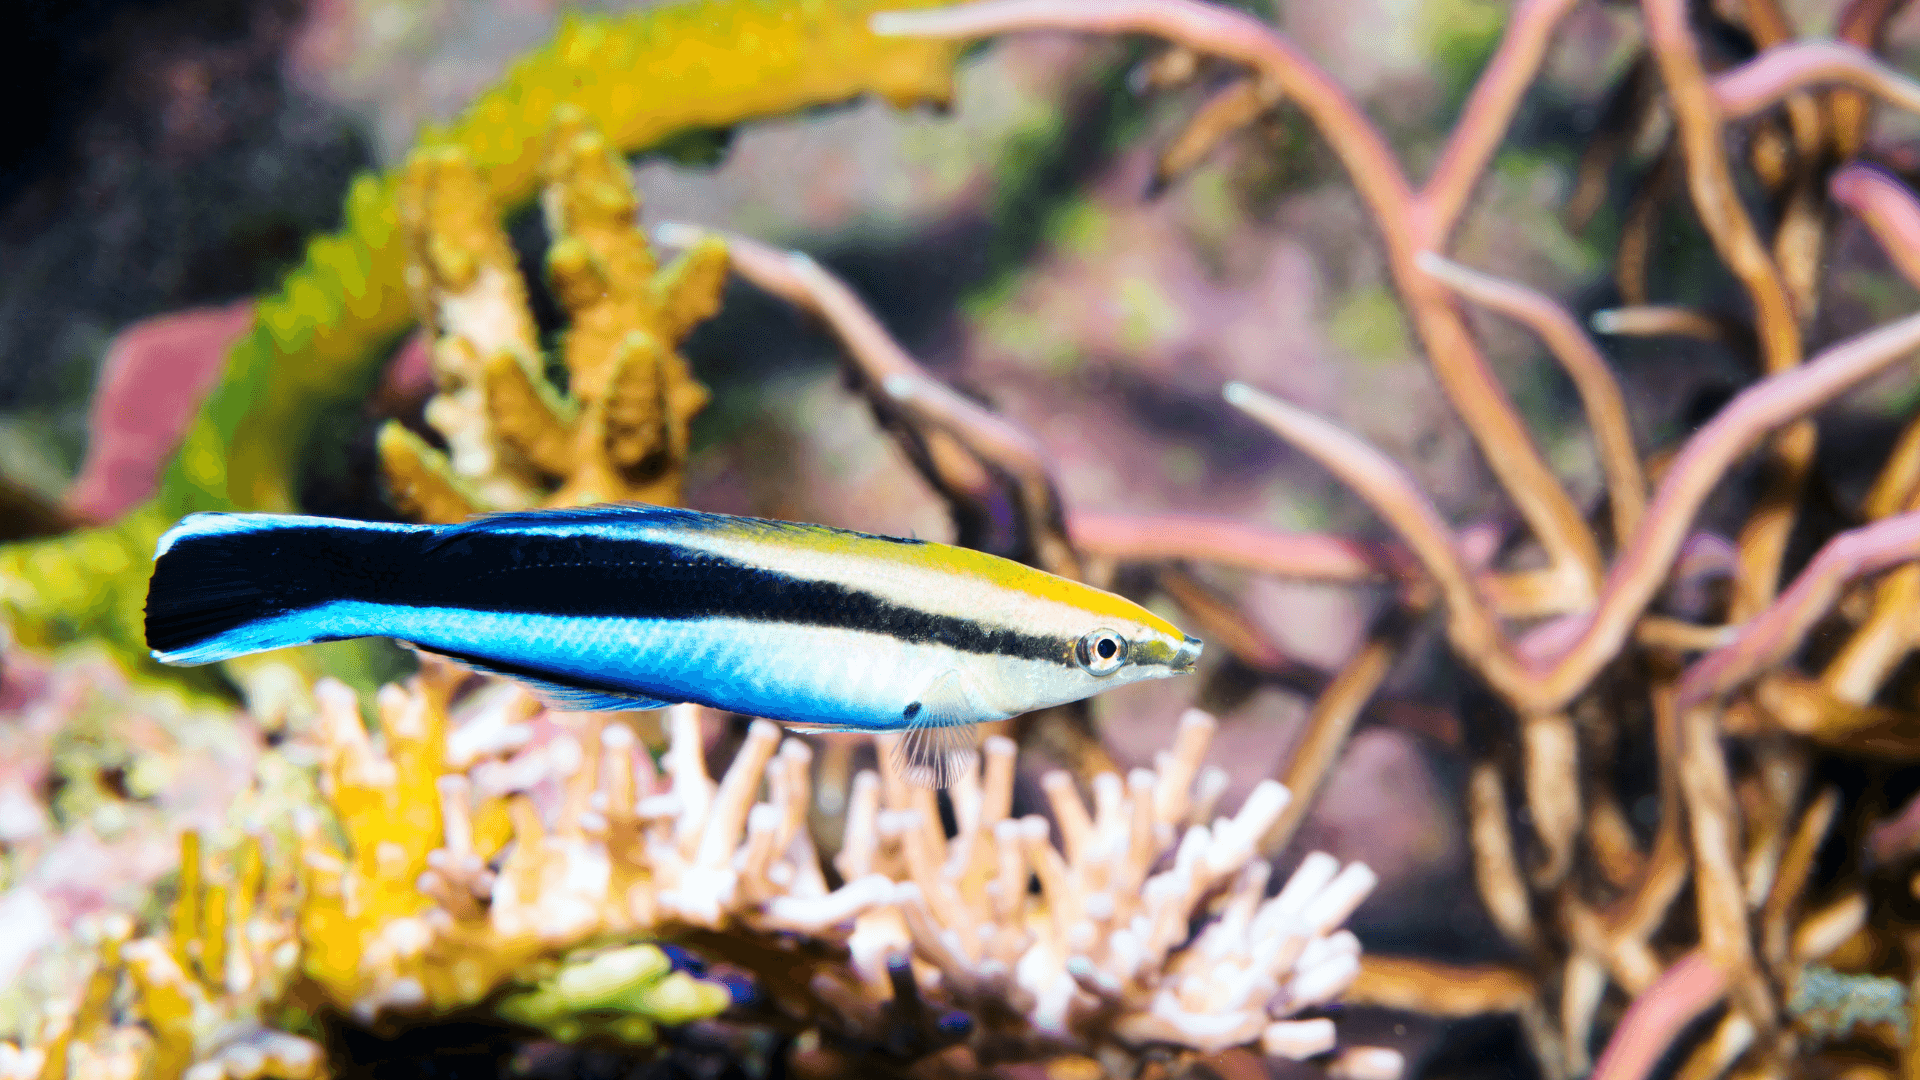 A photo of Wrasse